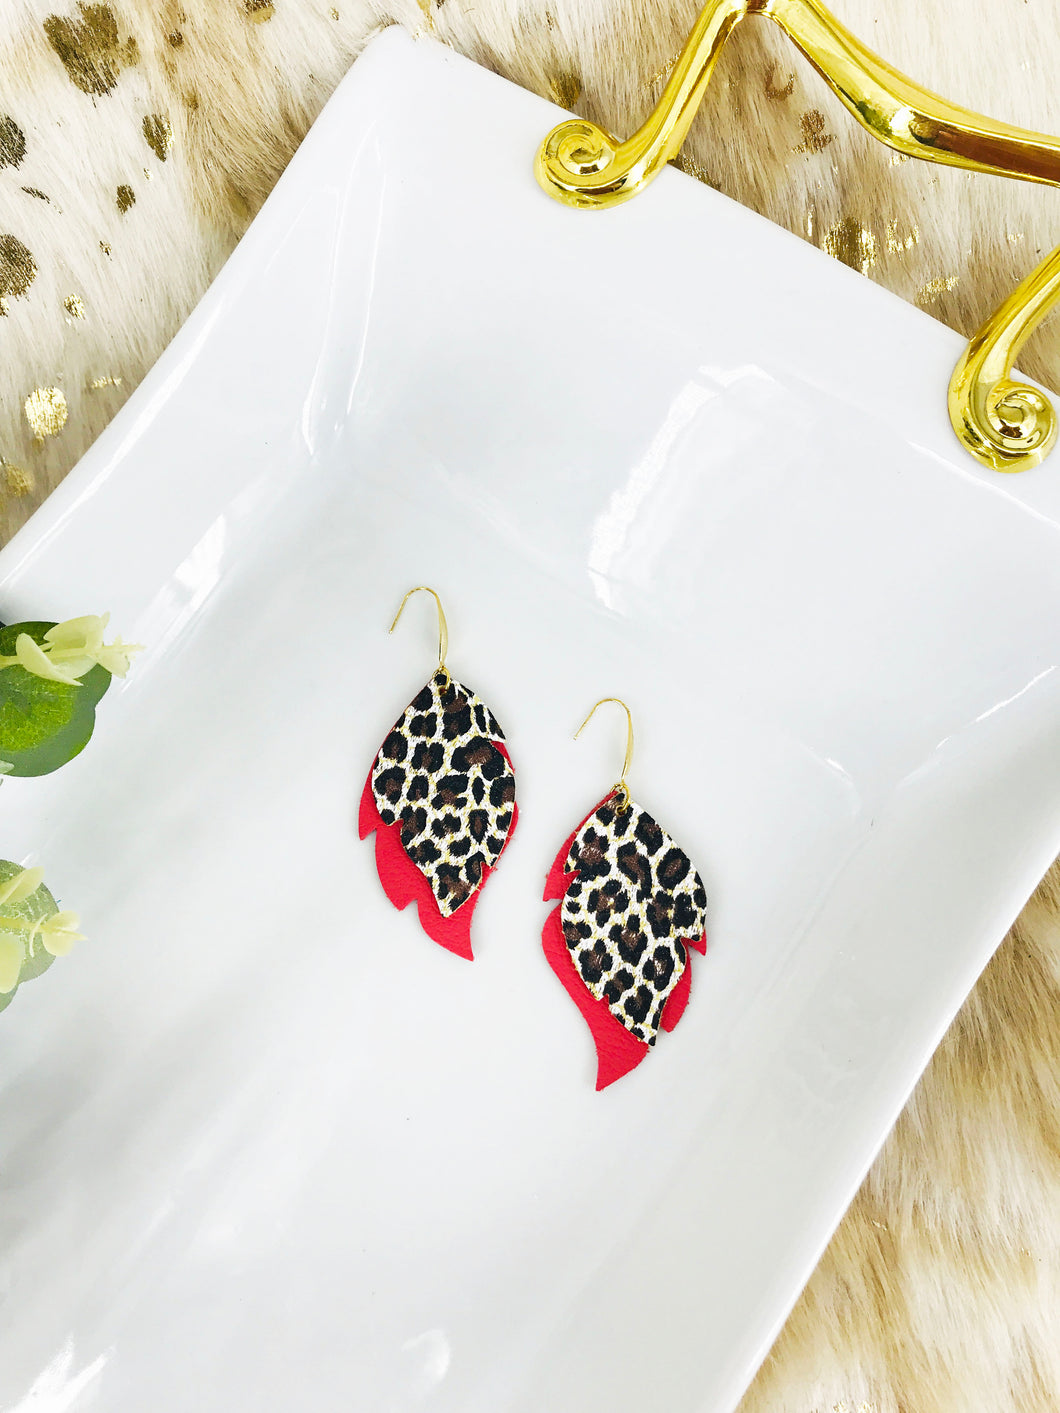 Coral and Cheetah Leather Earrings -E19-3035